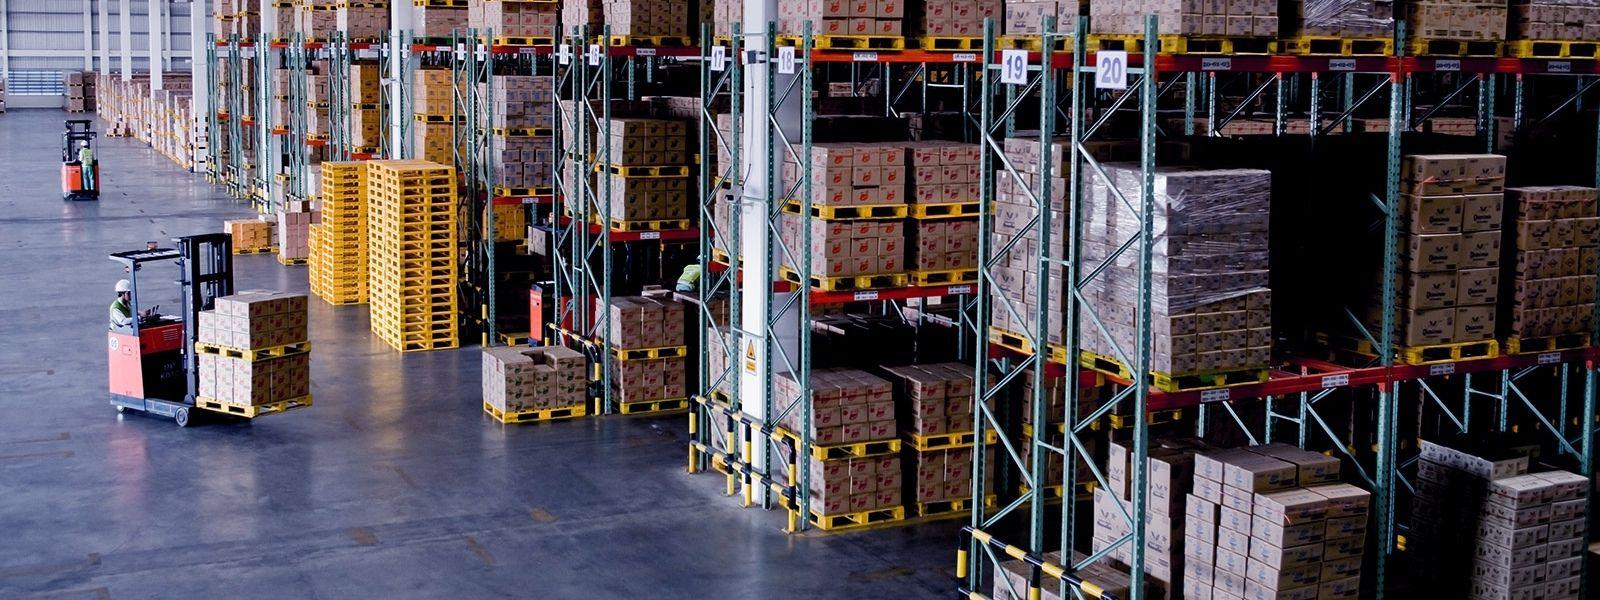 Warehouse with forklift truck